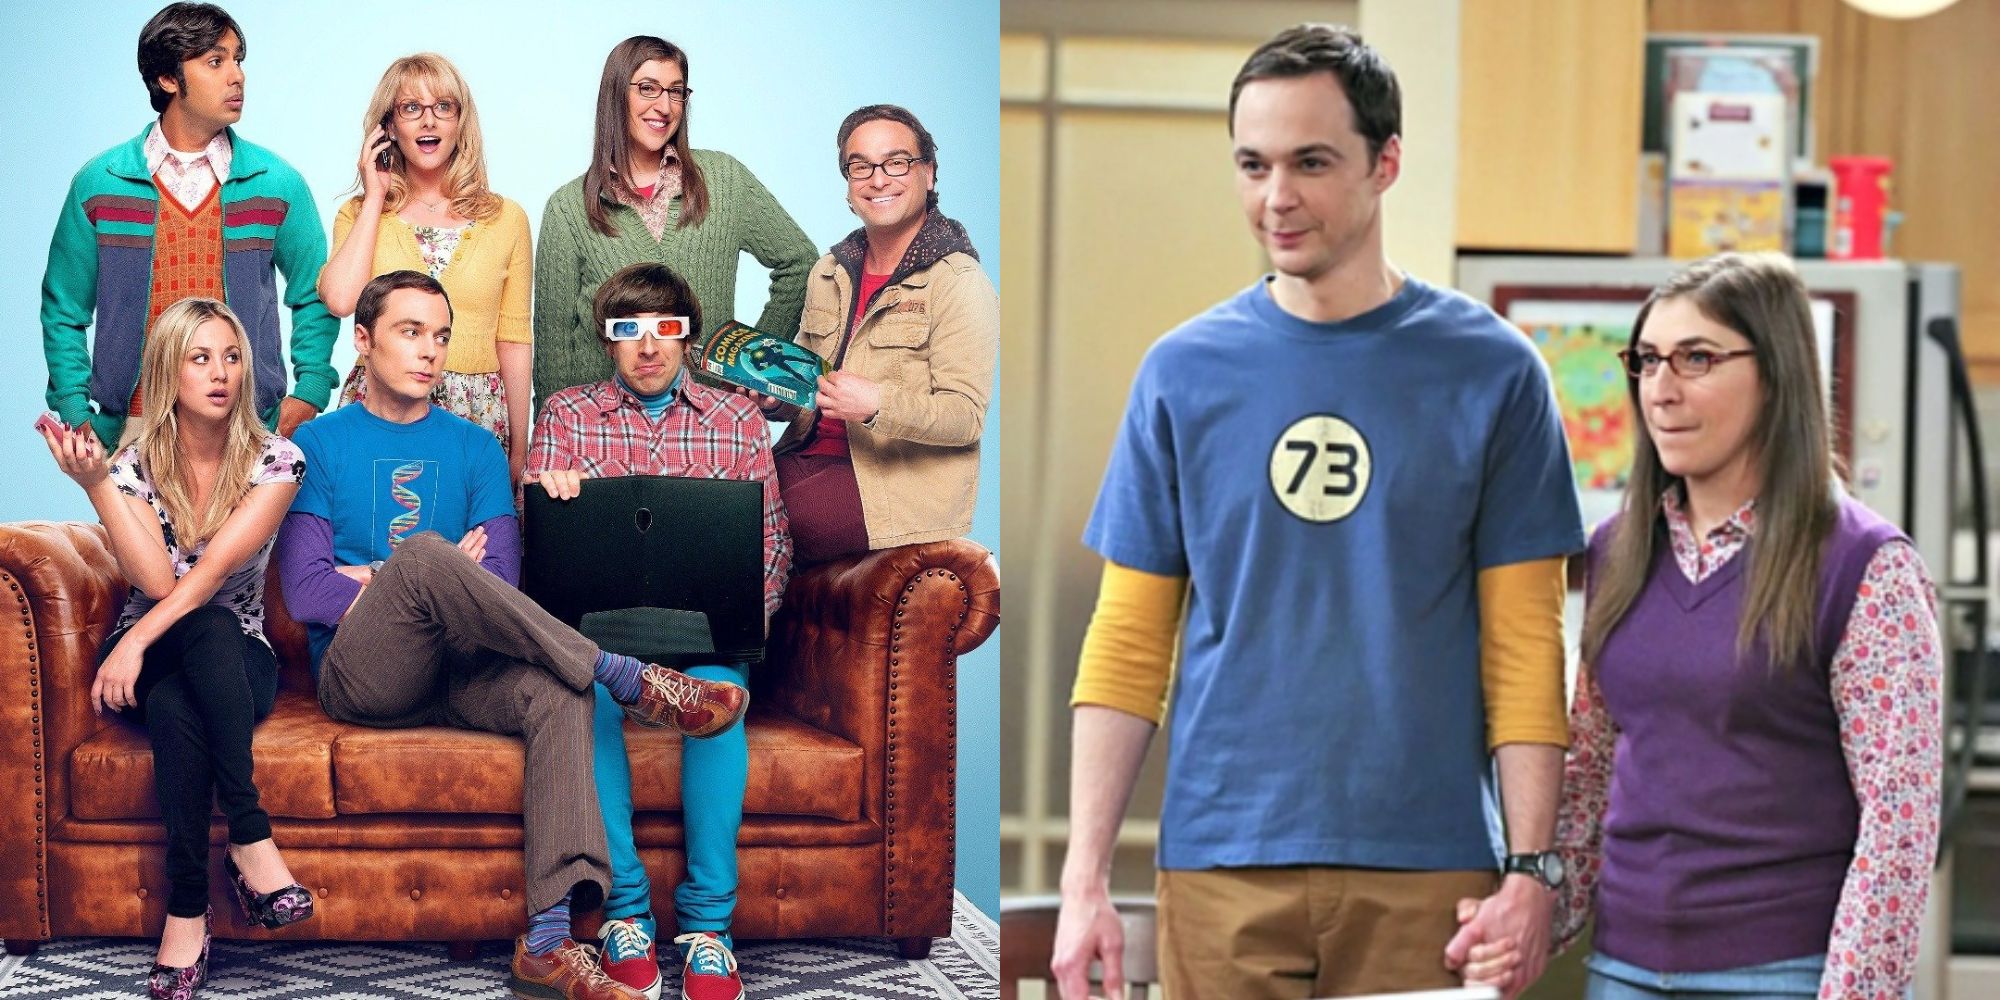 Split image showing the cast of The Big Bang Theory and Sheldon & Amy holding hands.